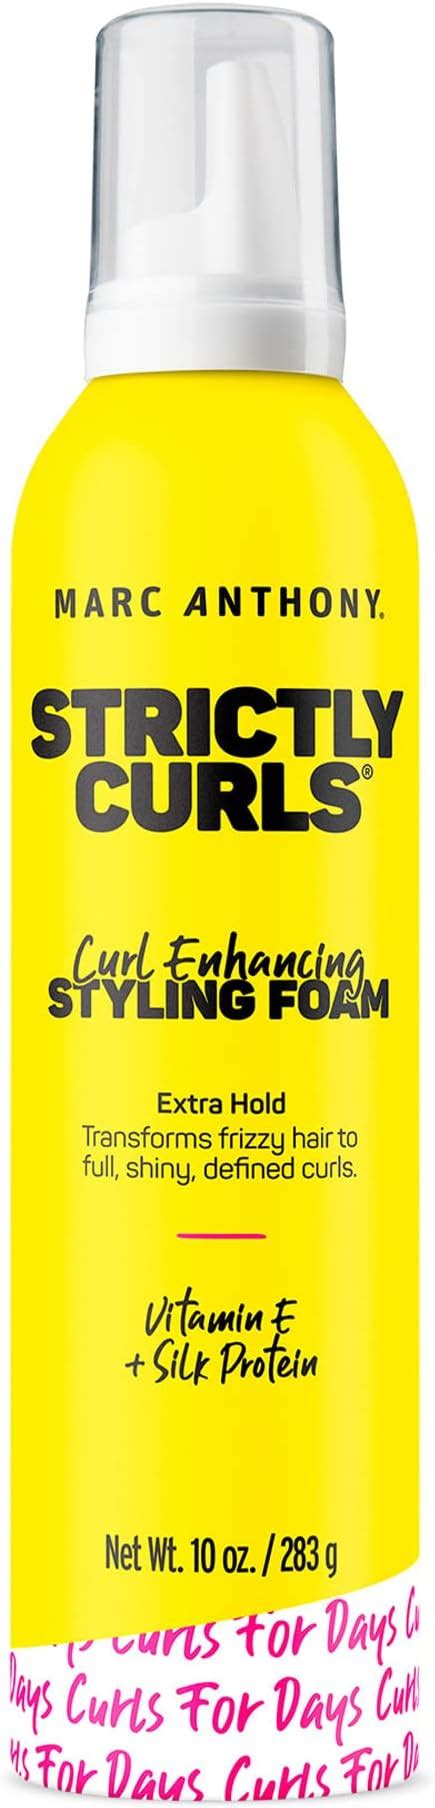 Marc Anthony Strictly Curls Curl Enhancing And Defining Styling Foam For